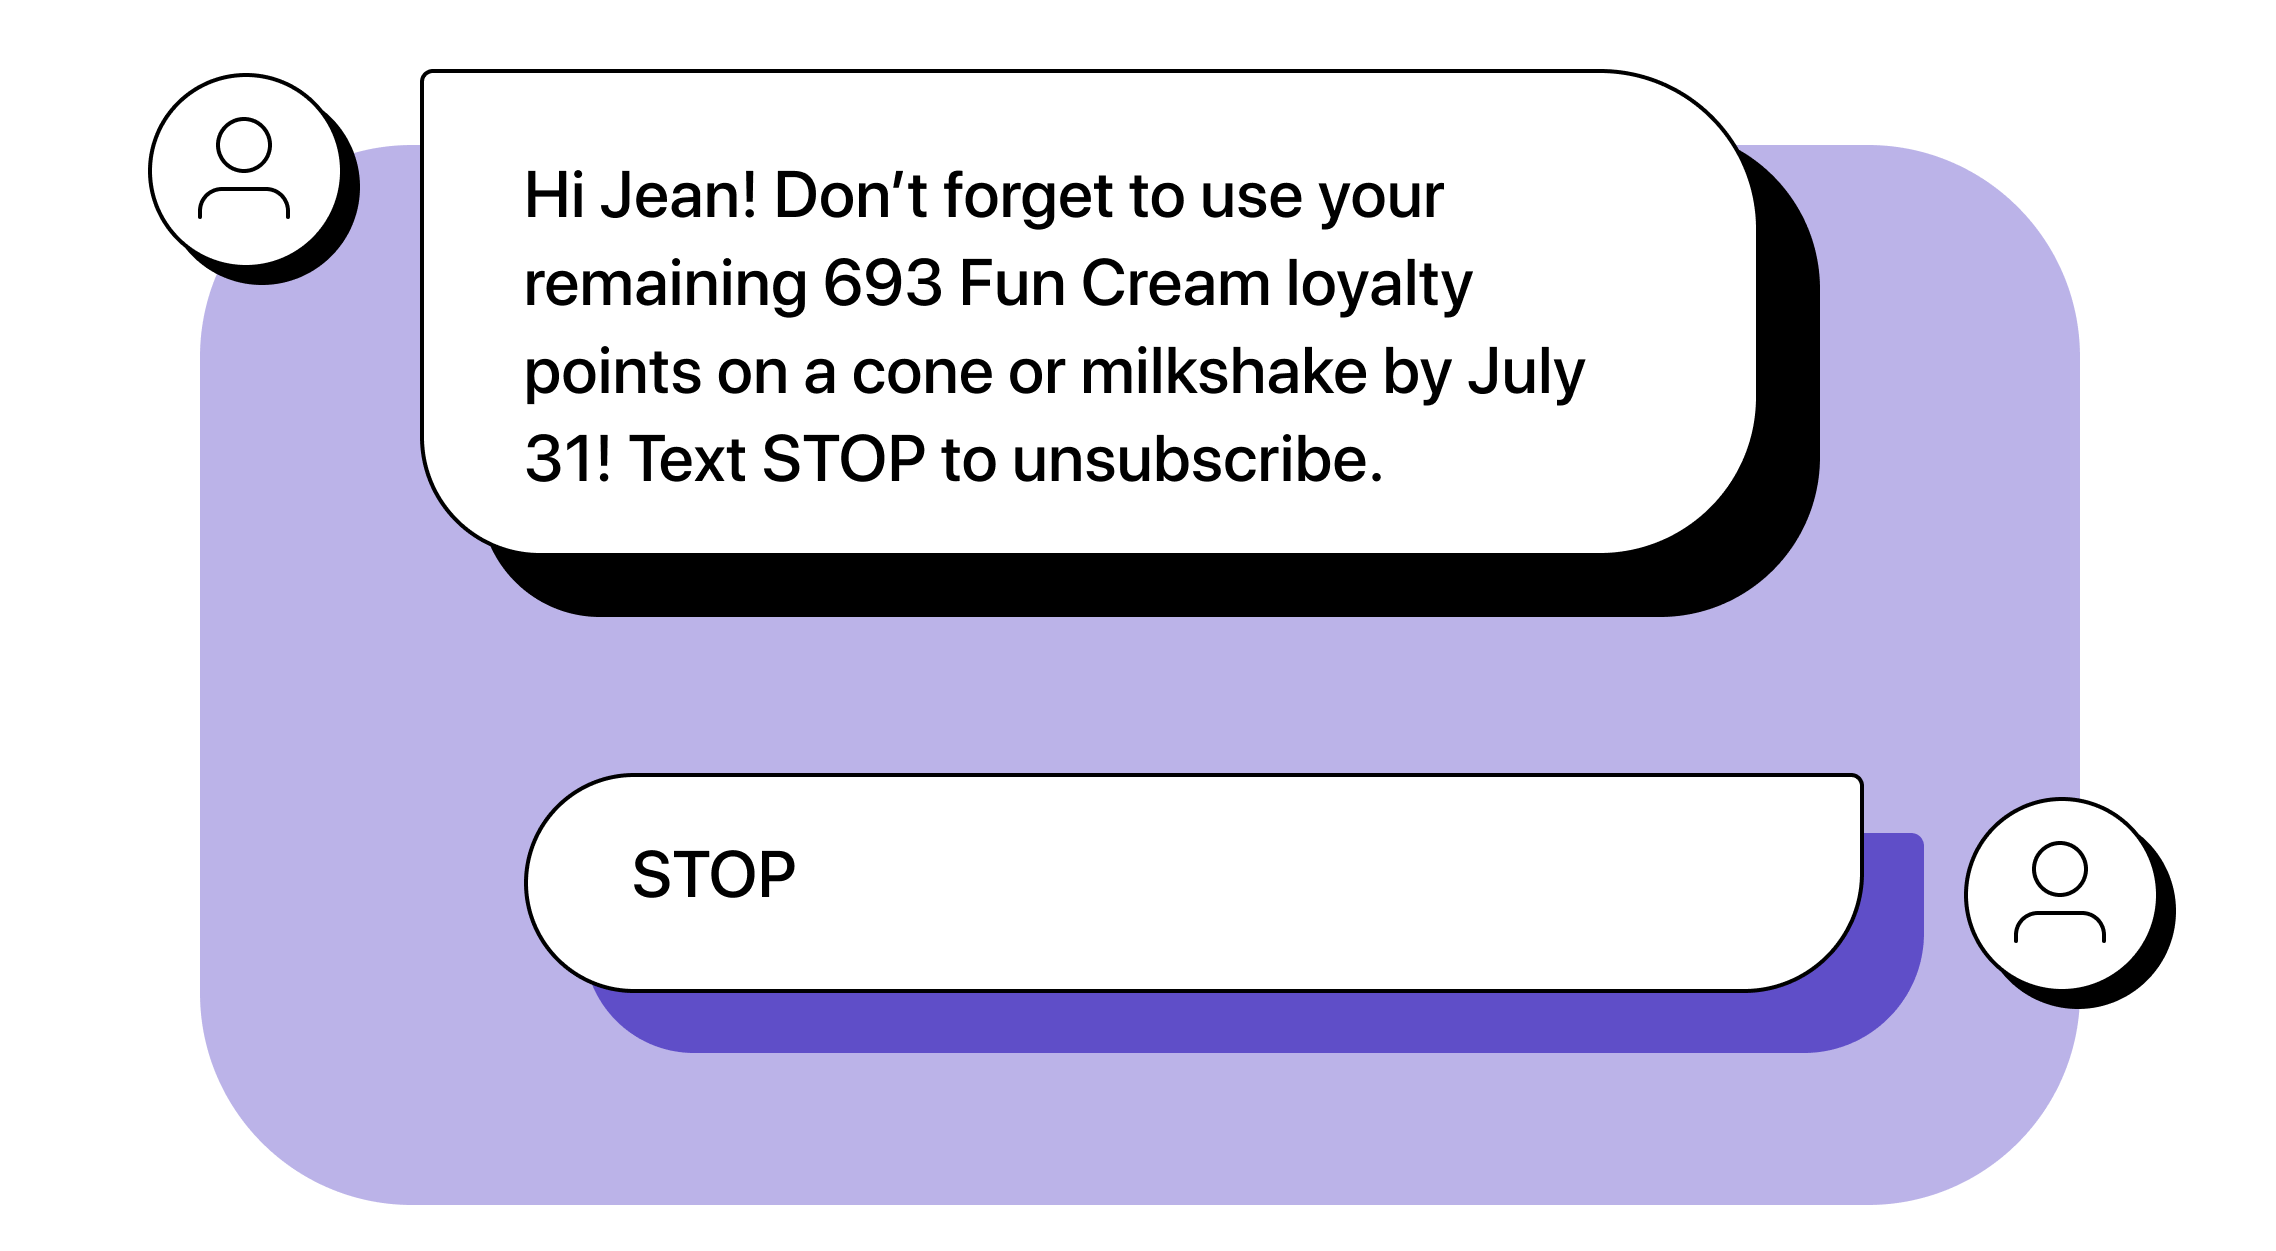 Business: Hi Jean! Don’t forget to use your remaining 693 Fun Cream loyalty points on a cone or milkshake by July 31! Text STOP to unsubscribe. Jean: STOP